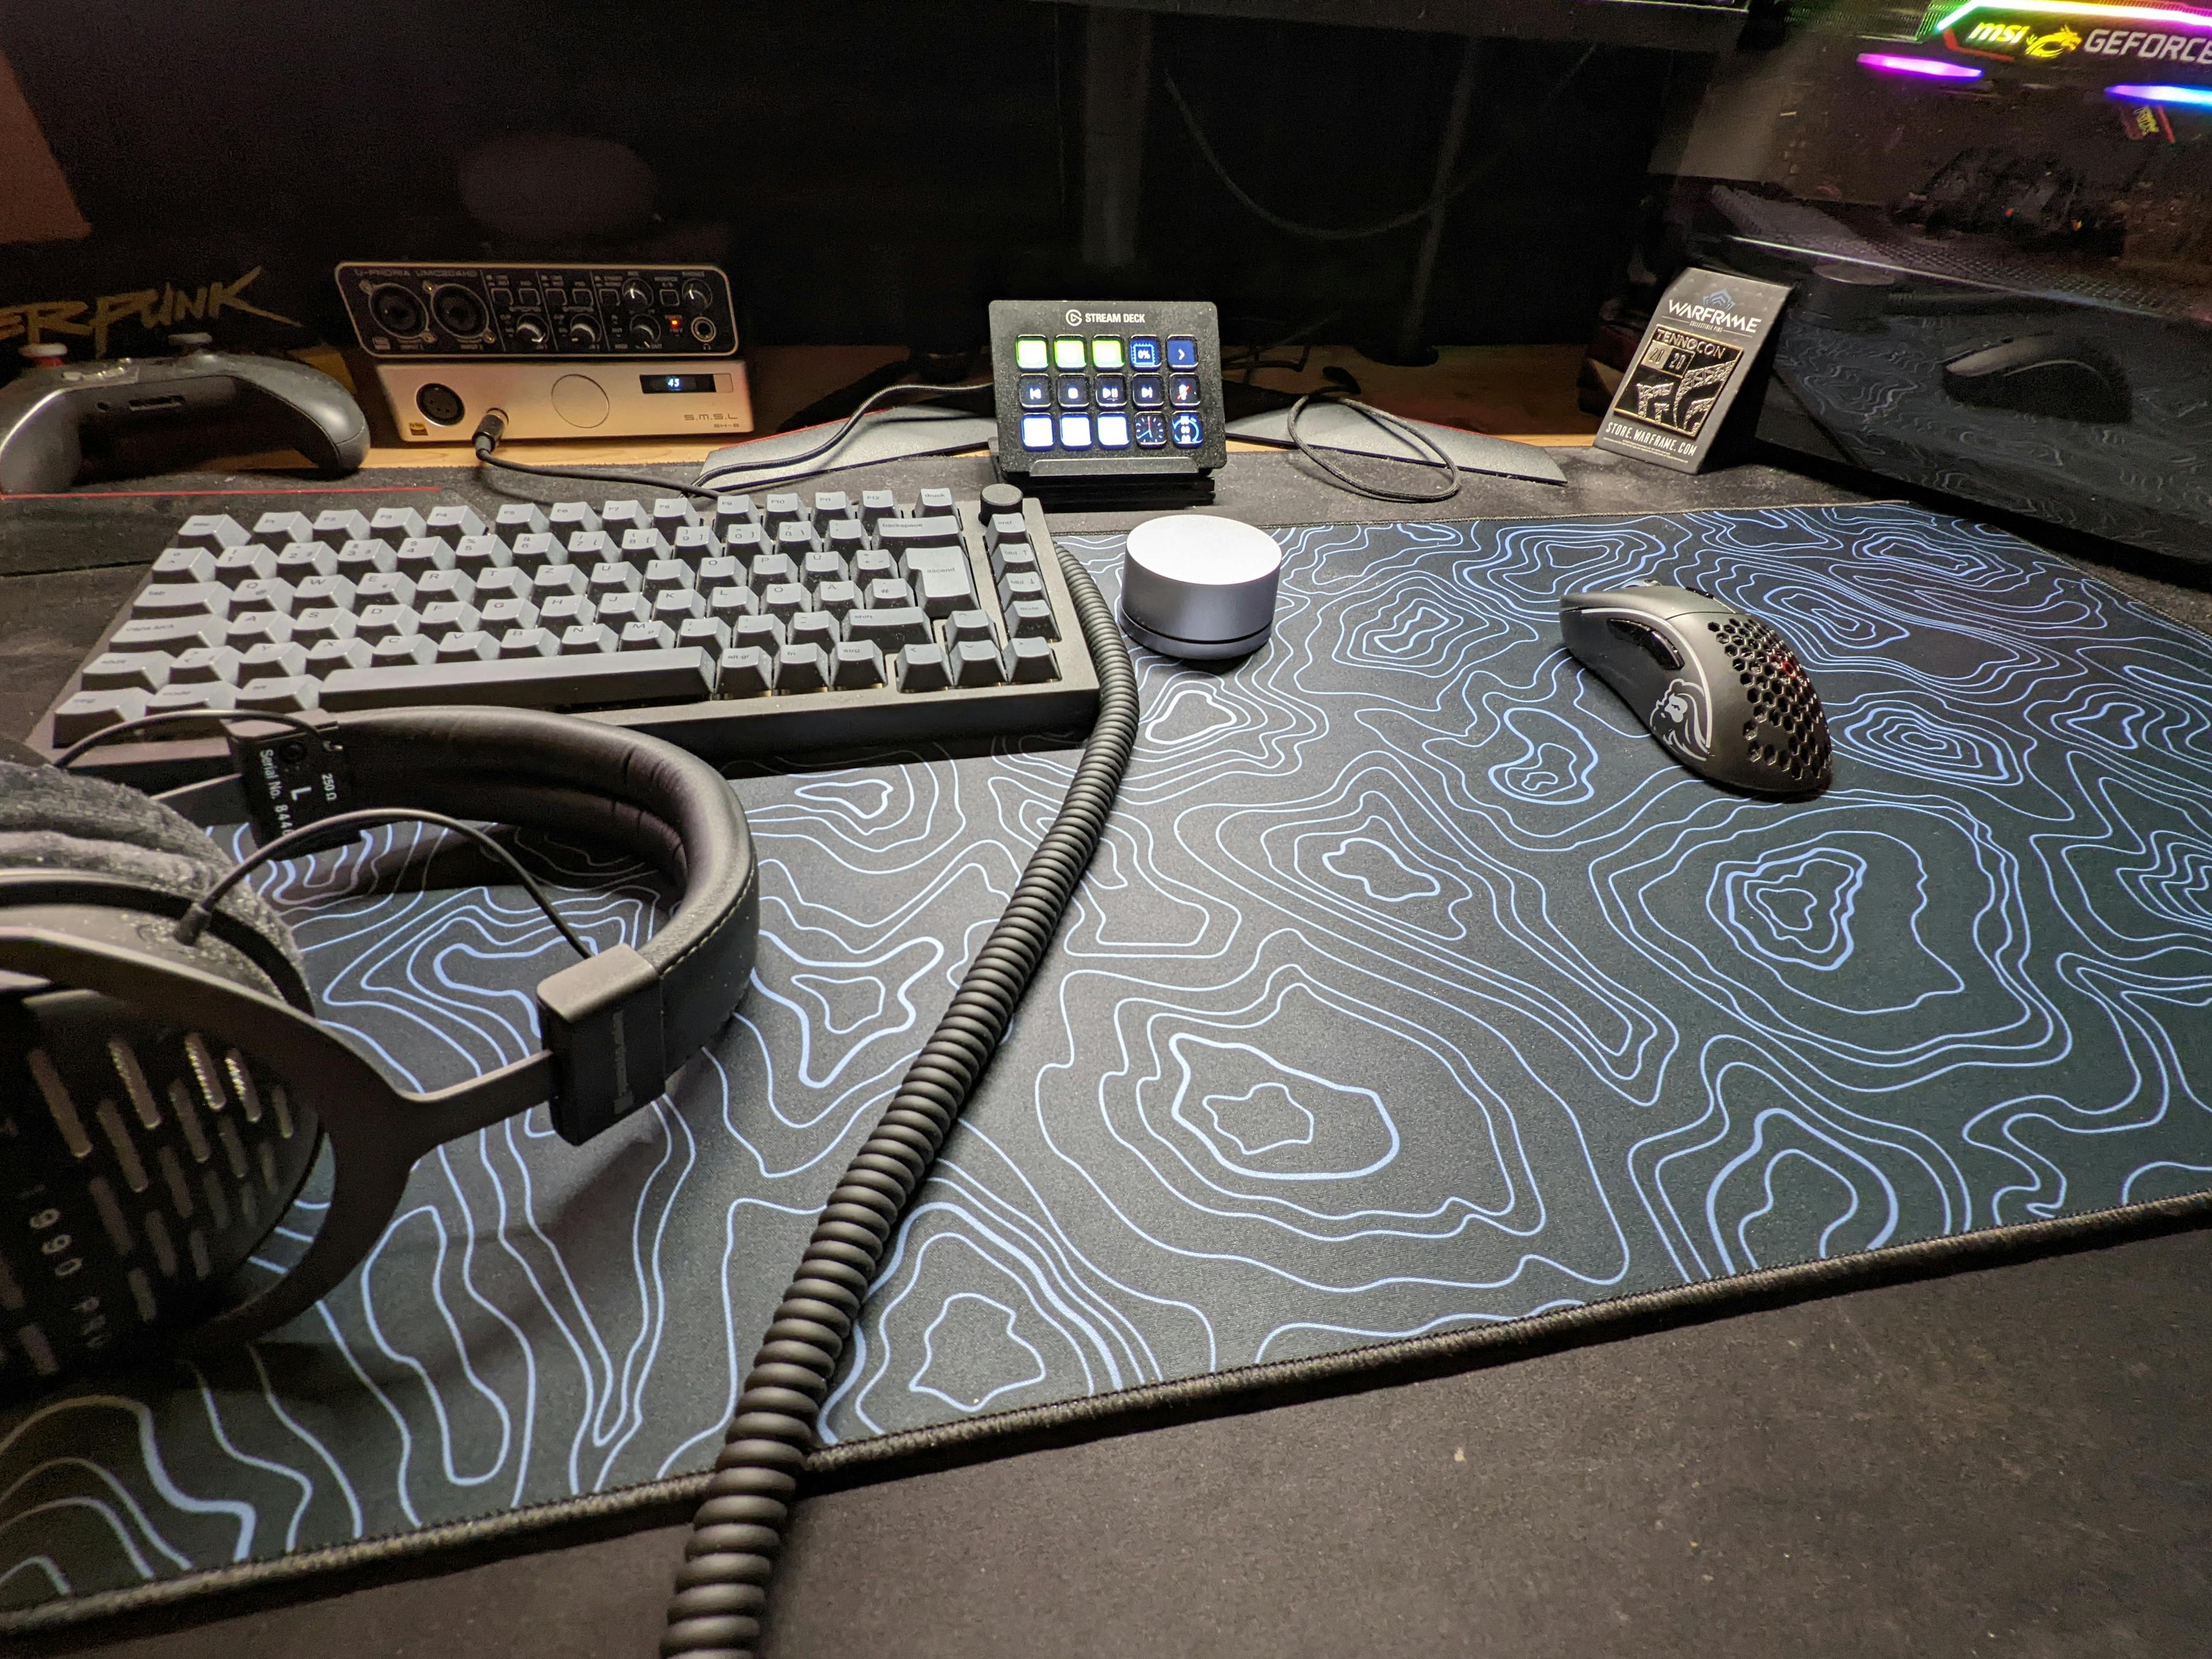 Review photo of deskmat by Anton